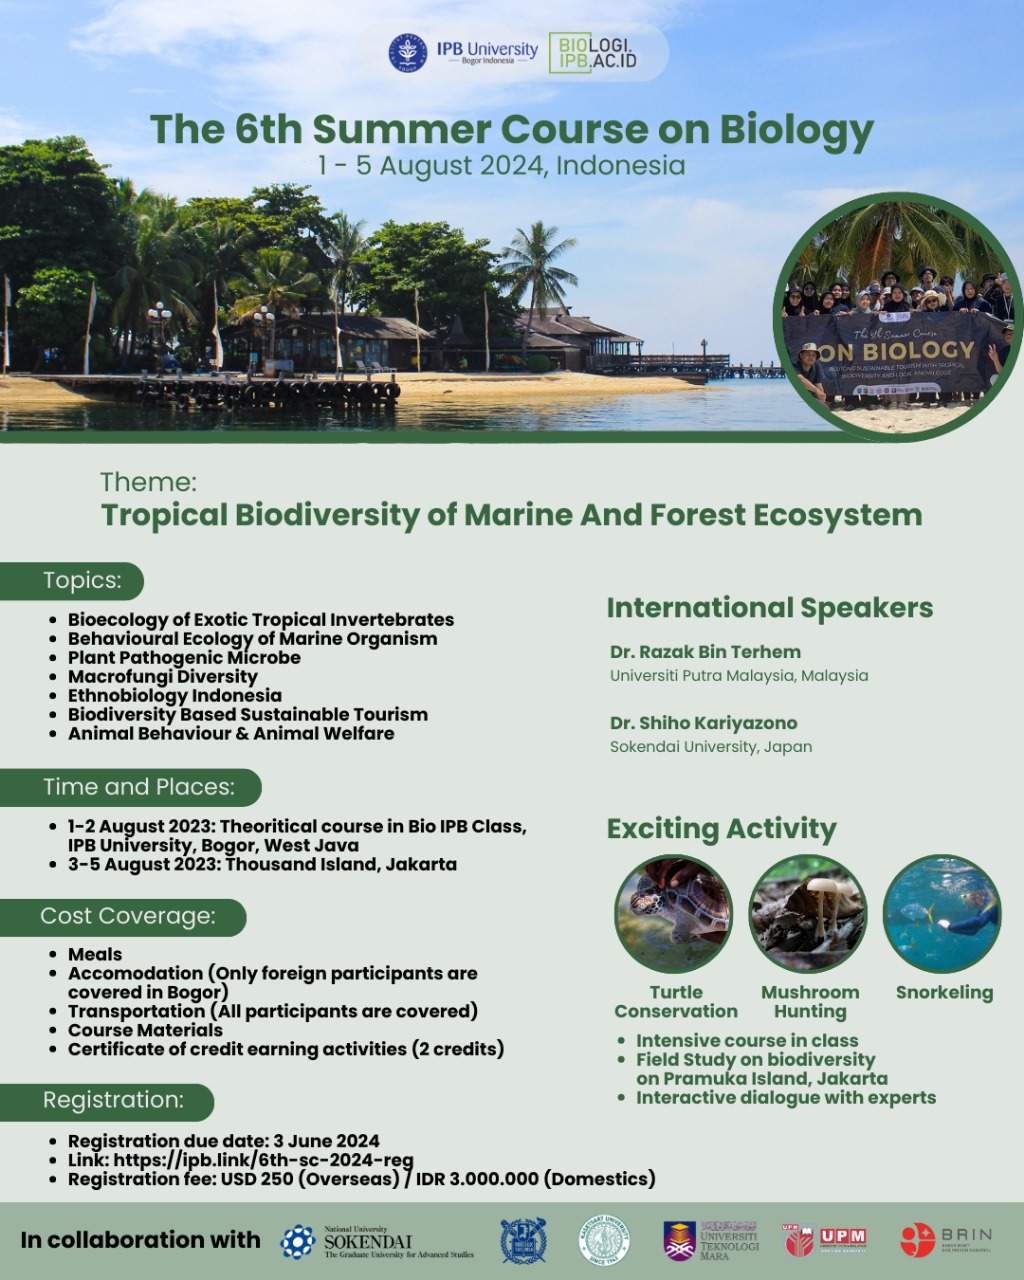 The 6th Summer Course on Biology 